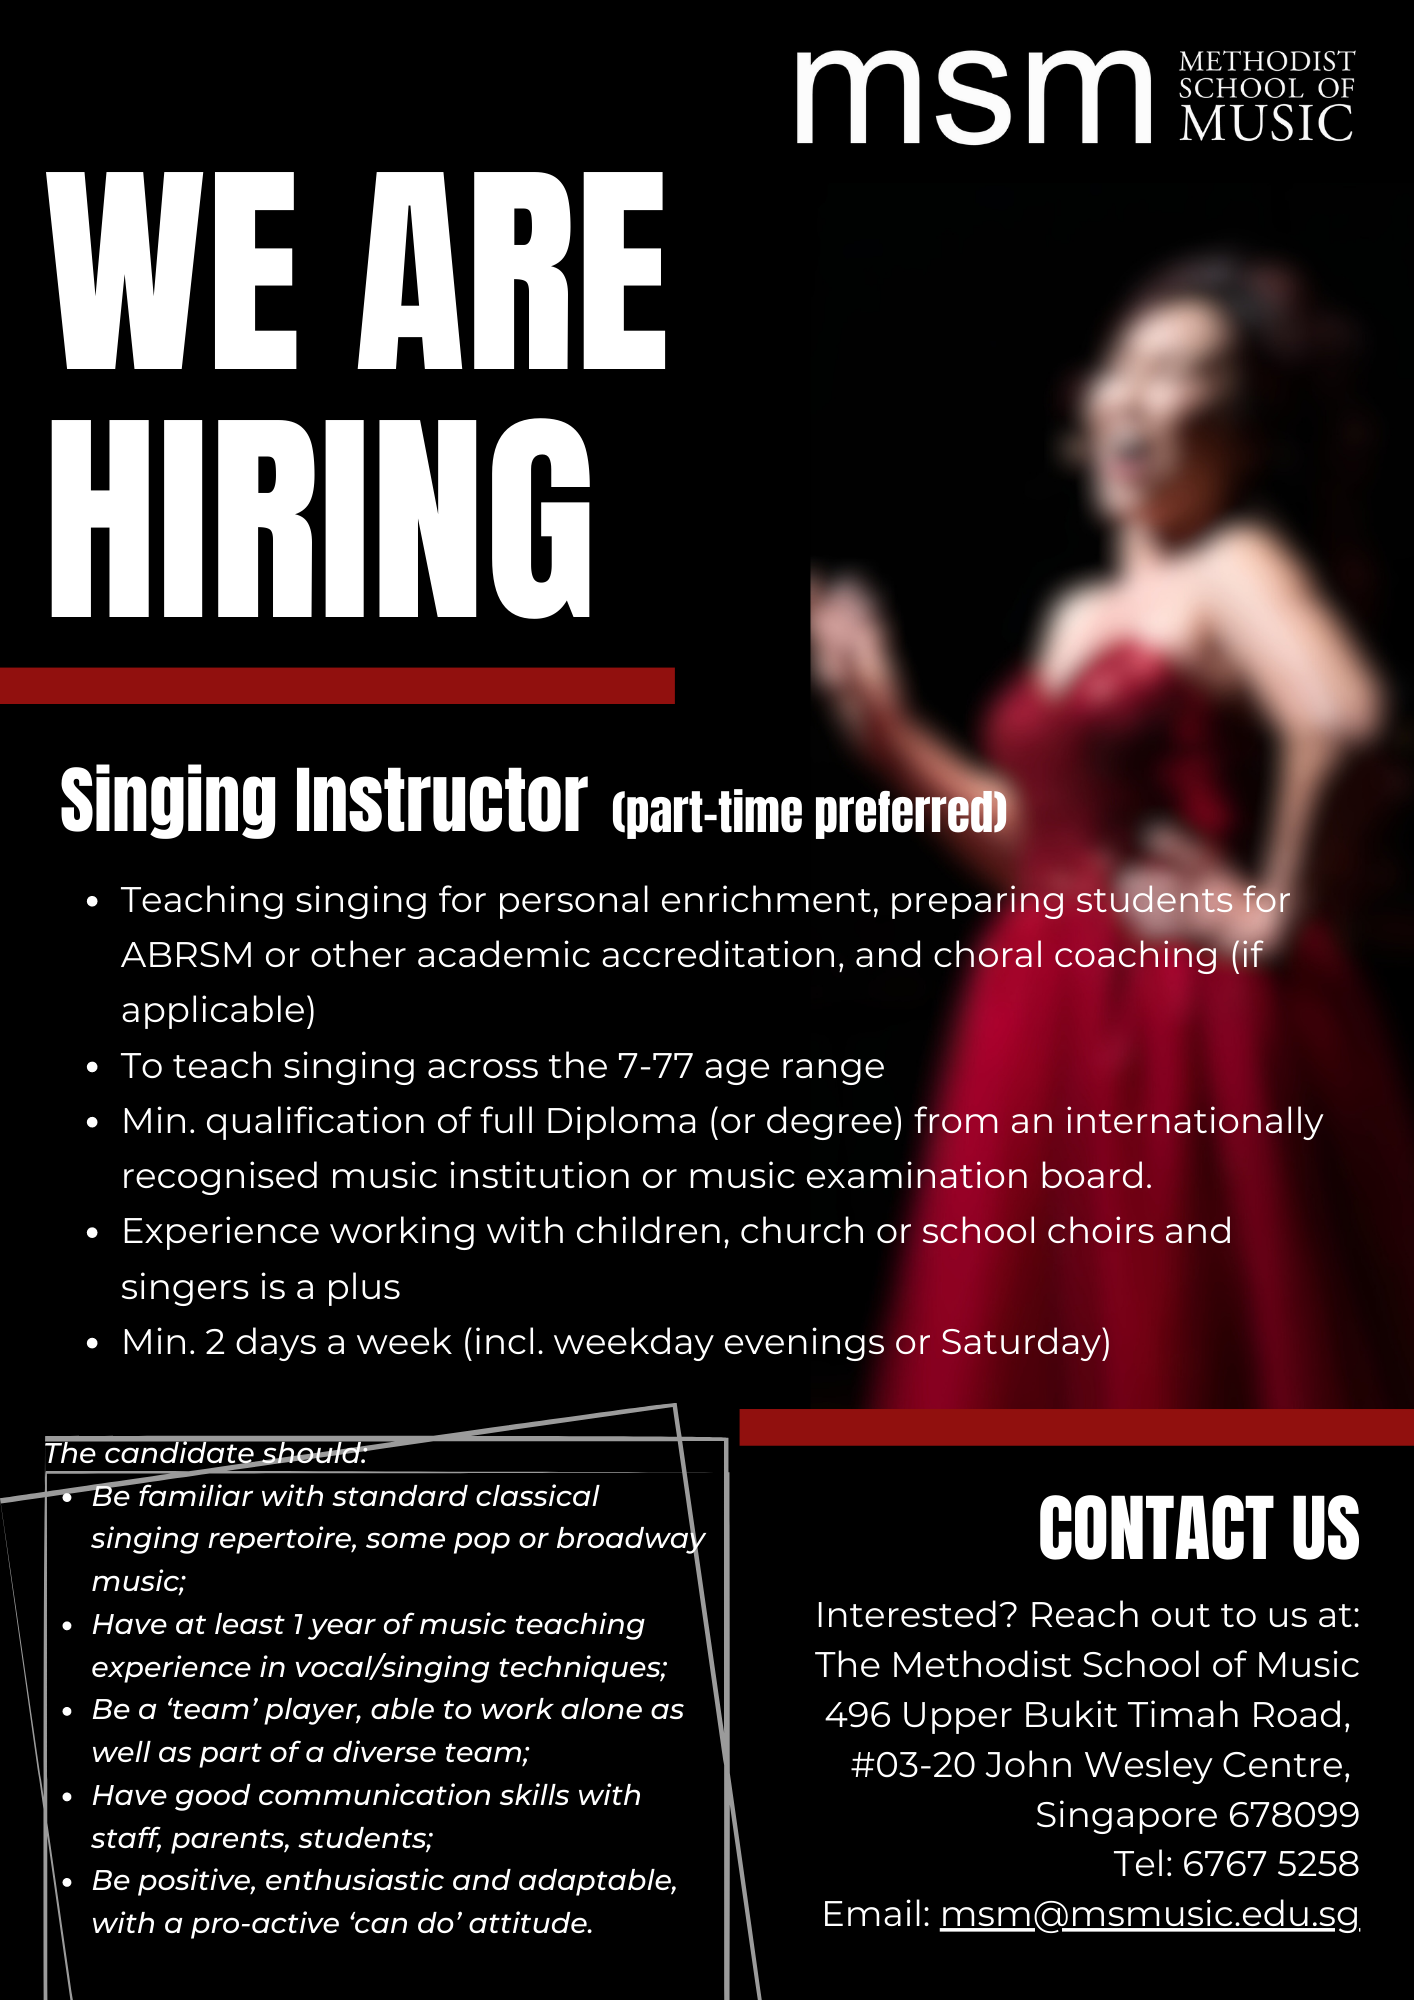 Join Our Team of Passionate Singing Teachers!